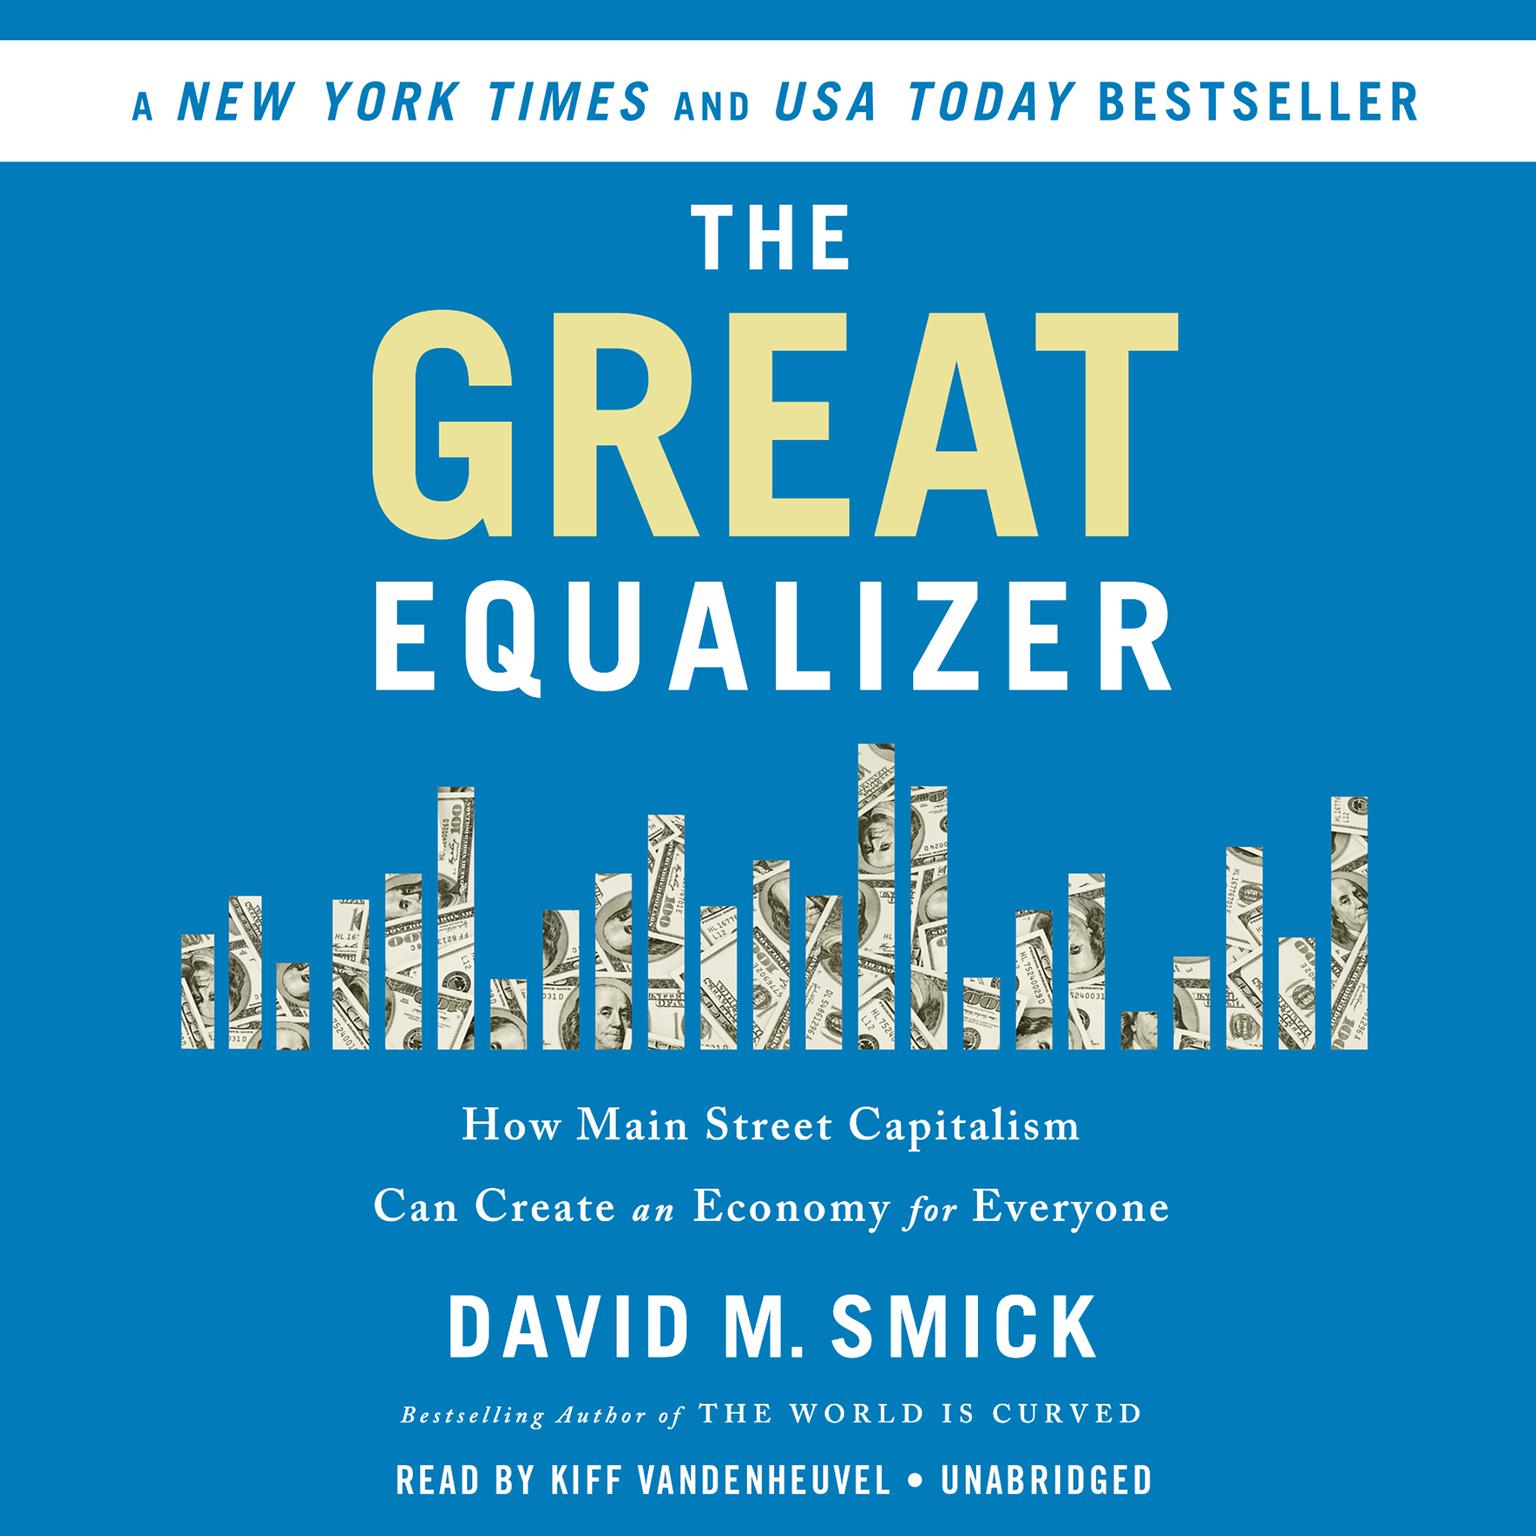 The Great Equalizer: How Main Street Capitalism Can Create an Economy for Everyone Audiobook, by David M. Smick